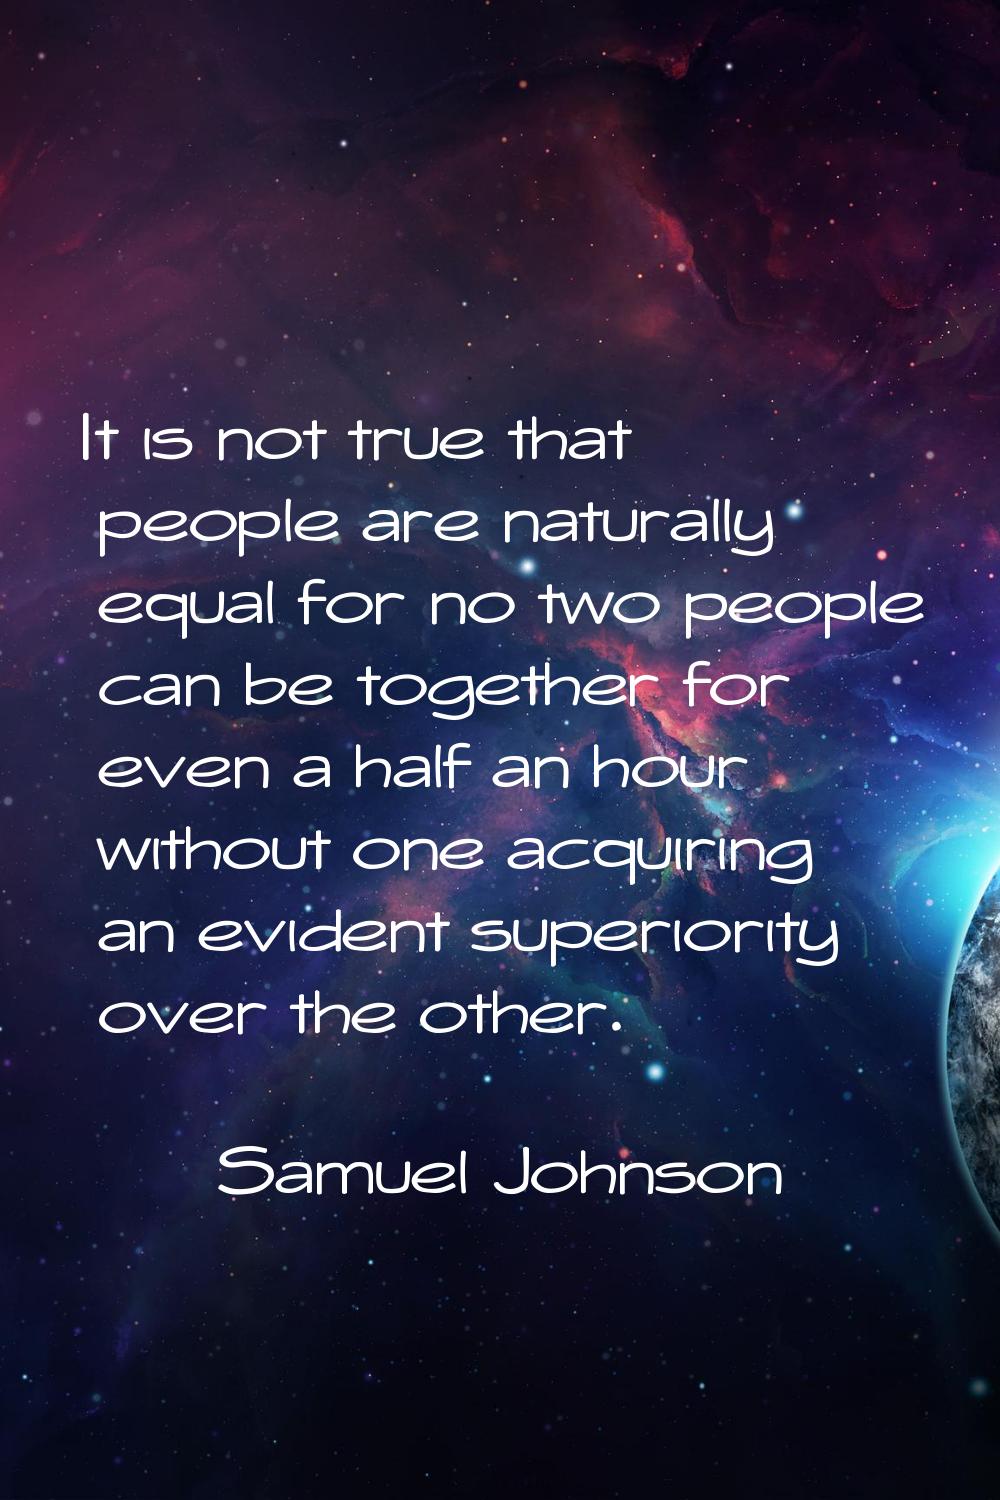 It is not true that people are naturally equal for no two people can be together for even a half an